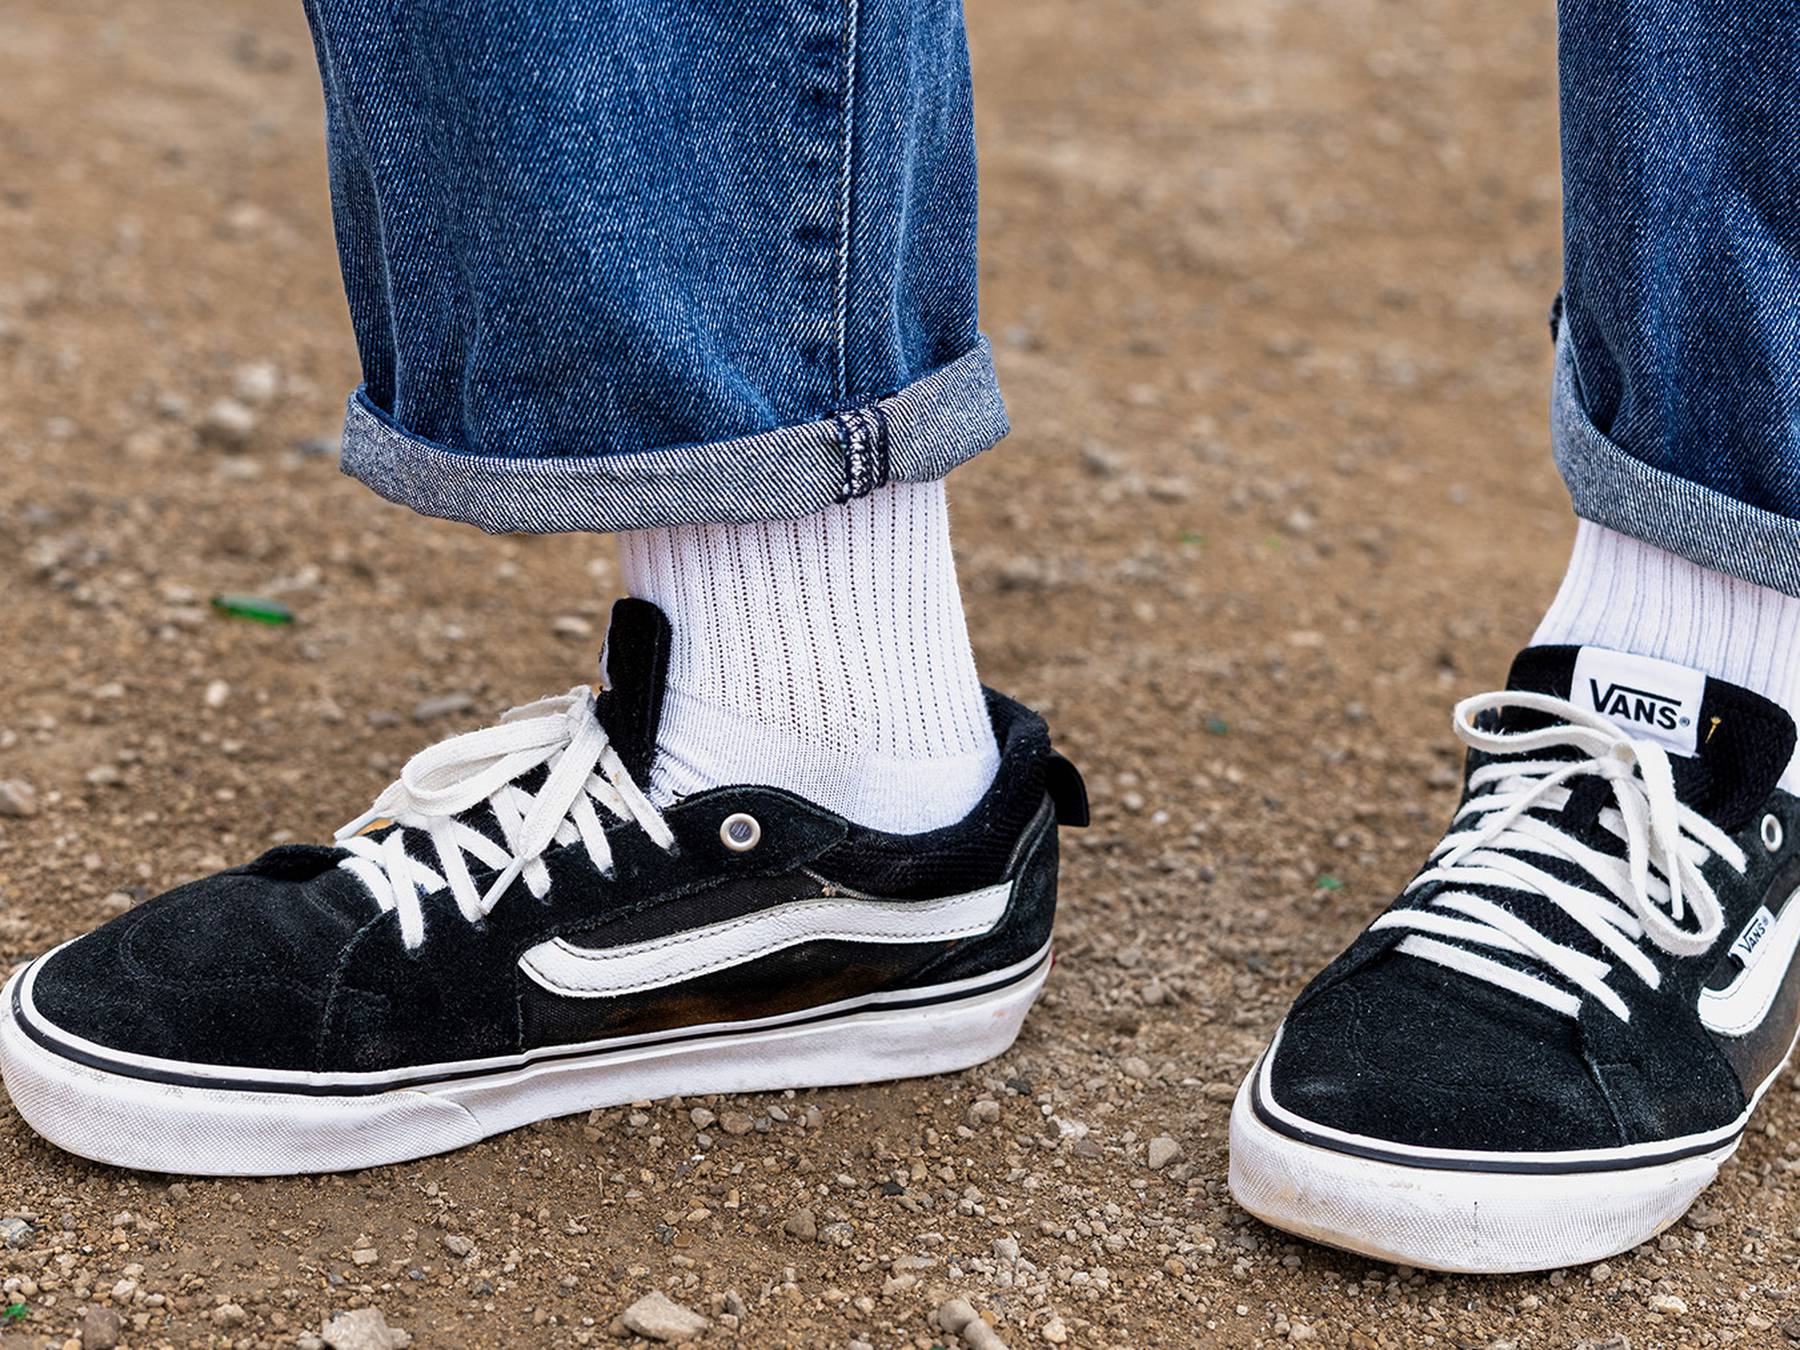 Vans Knows You're Sick of Their Shoes | BoF